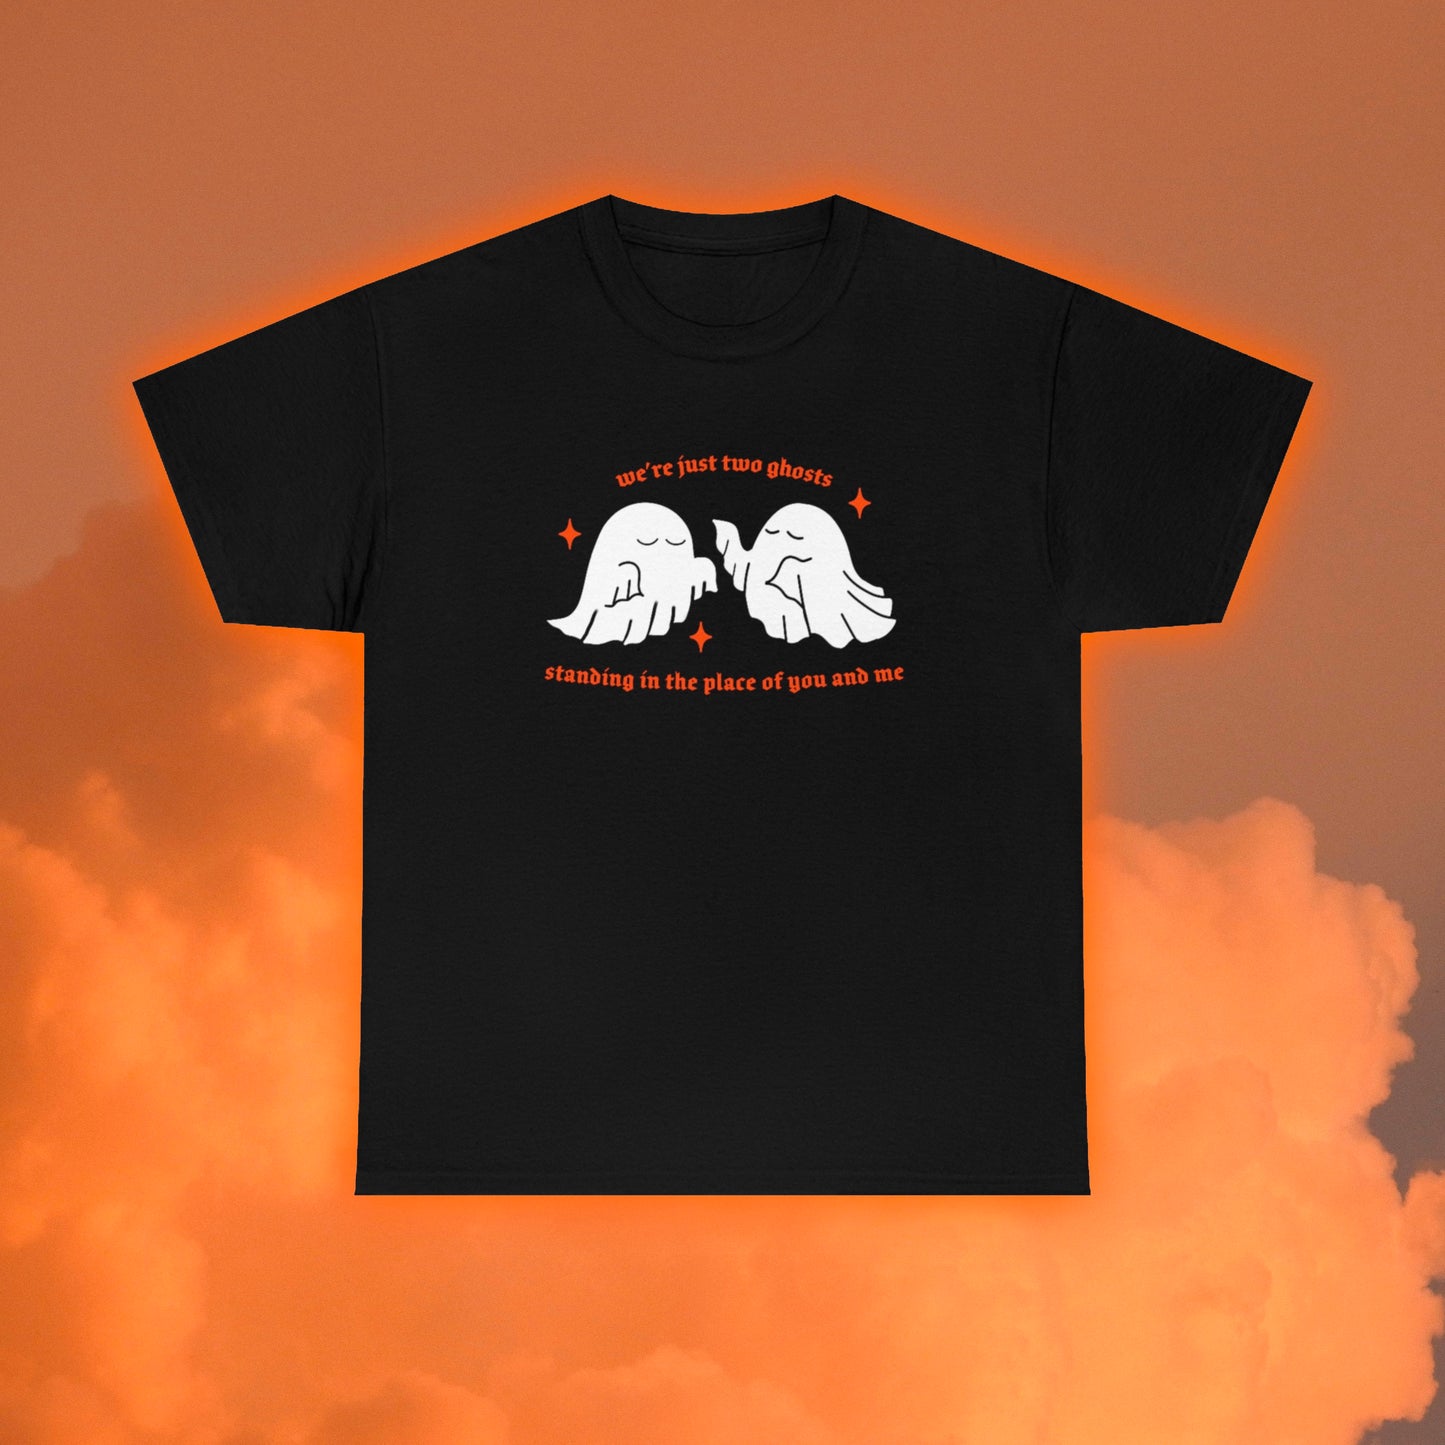 Two Ghosts tee